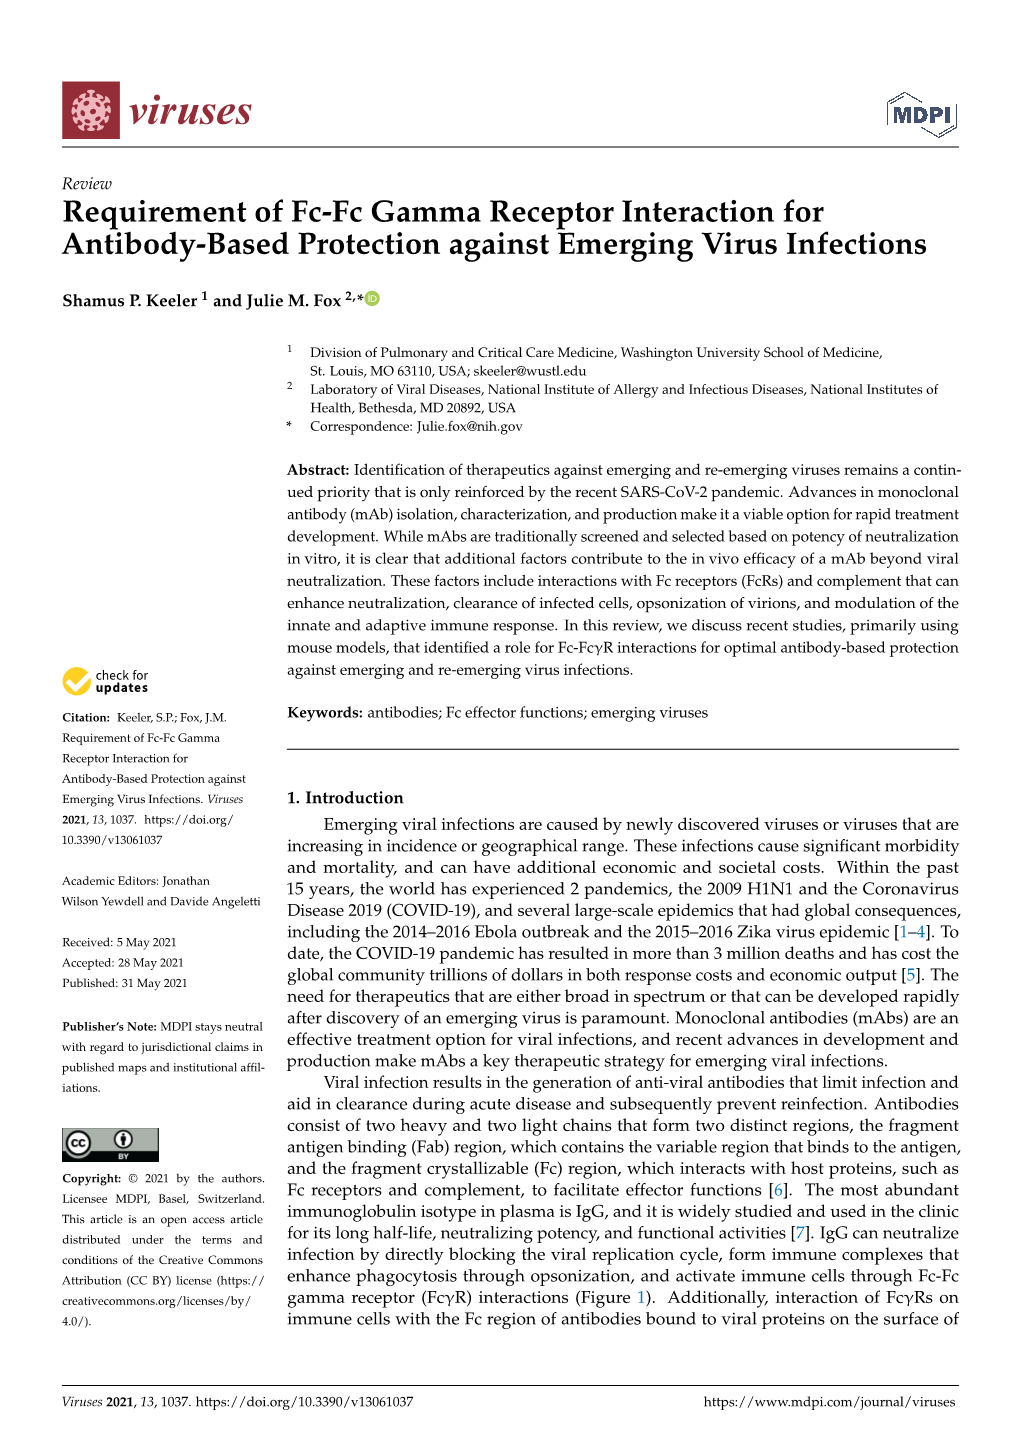 Requirement of Fc-Fc Gamma Receptor Interaction for Antibody-Based Protection Against Emerging Virus Infections